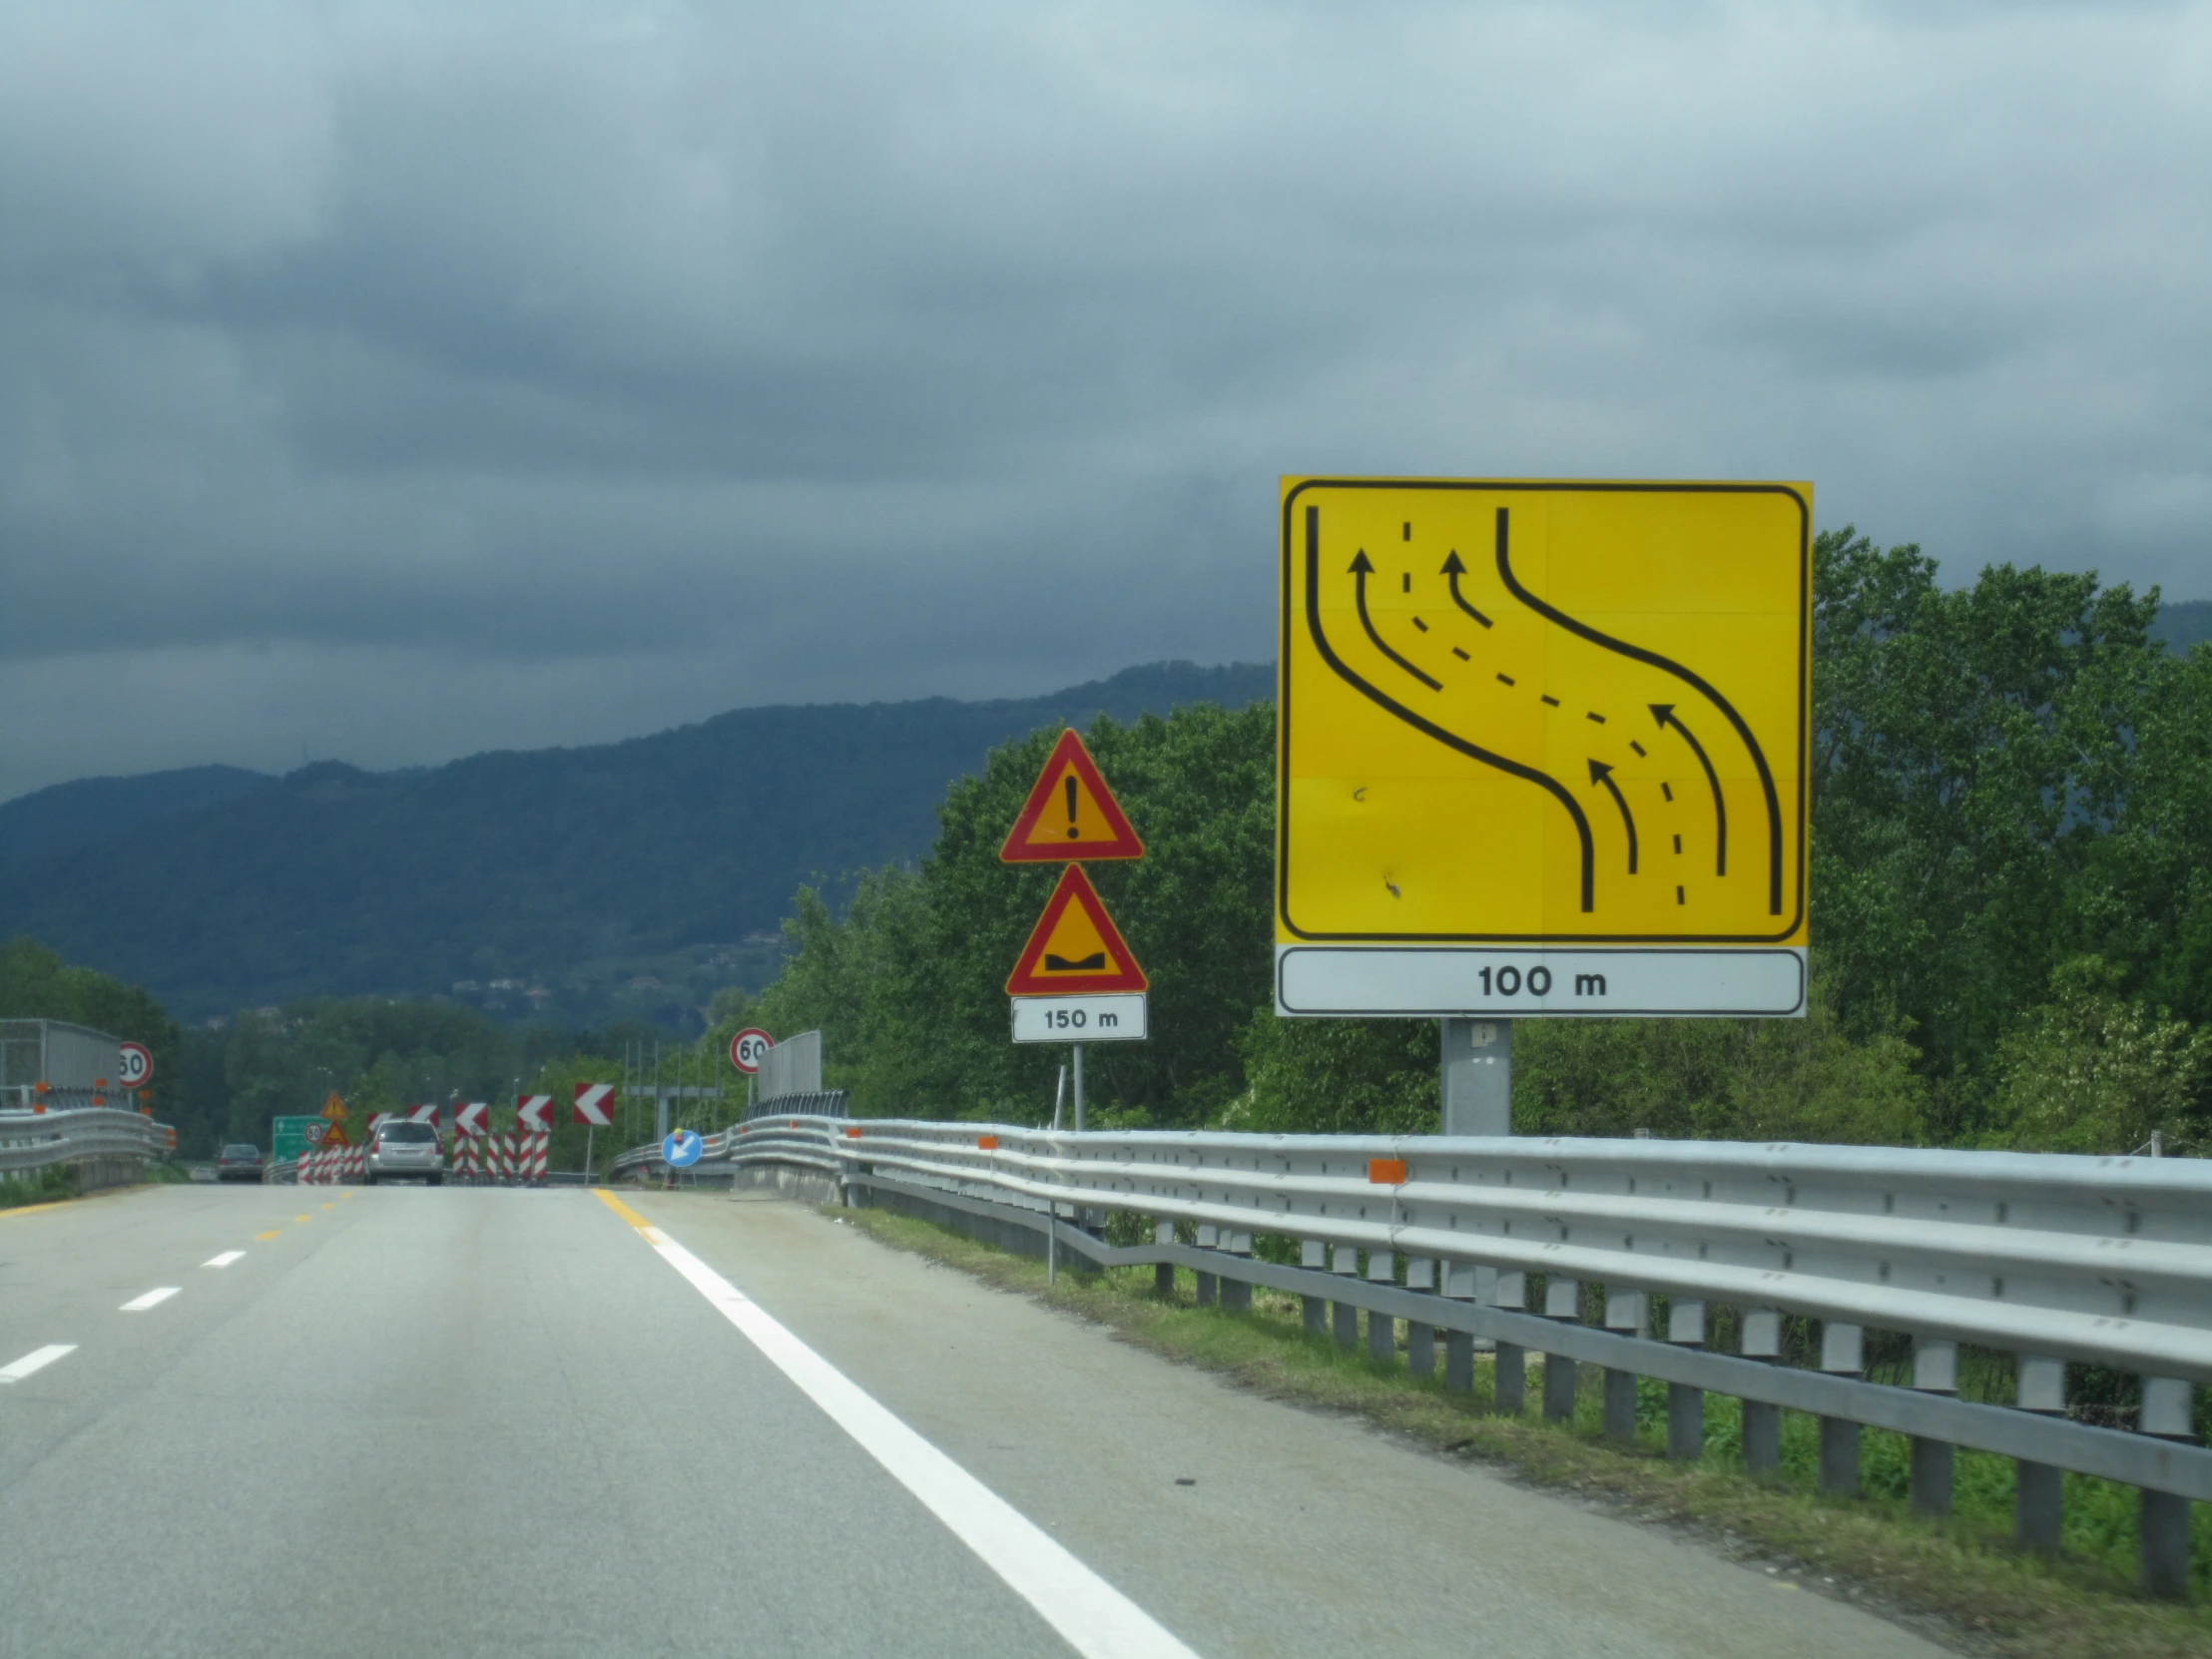 road signs give directions to people who are on the side of the road